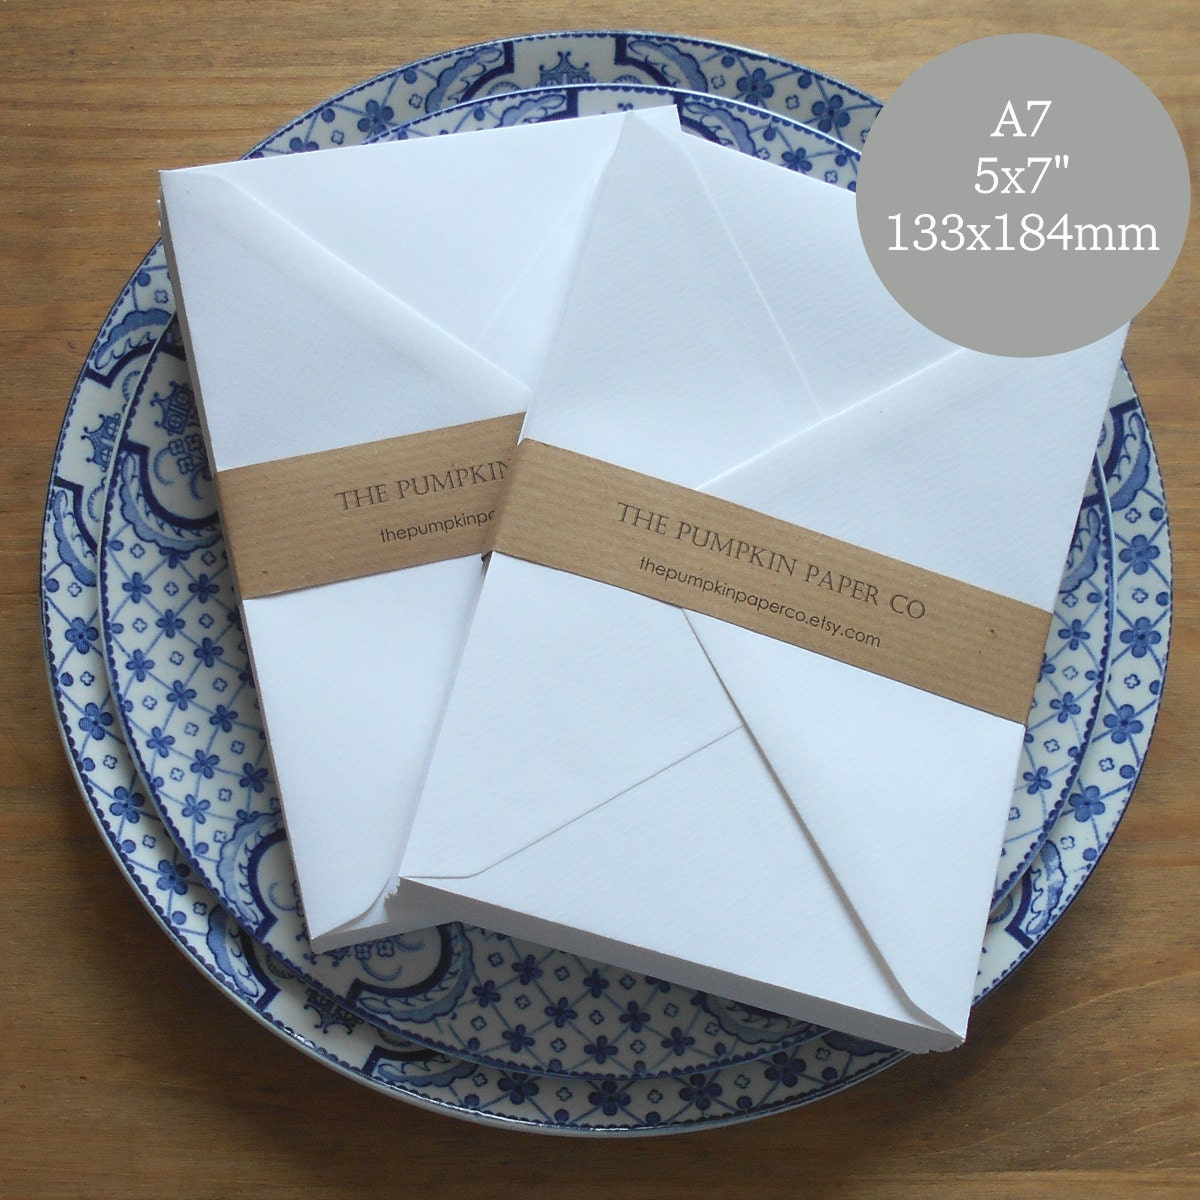 What Size Envelopes For 5x7 Wedding Invitations